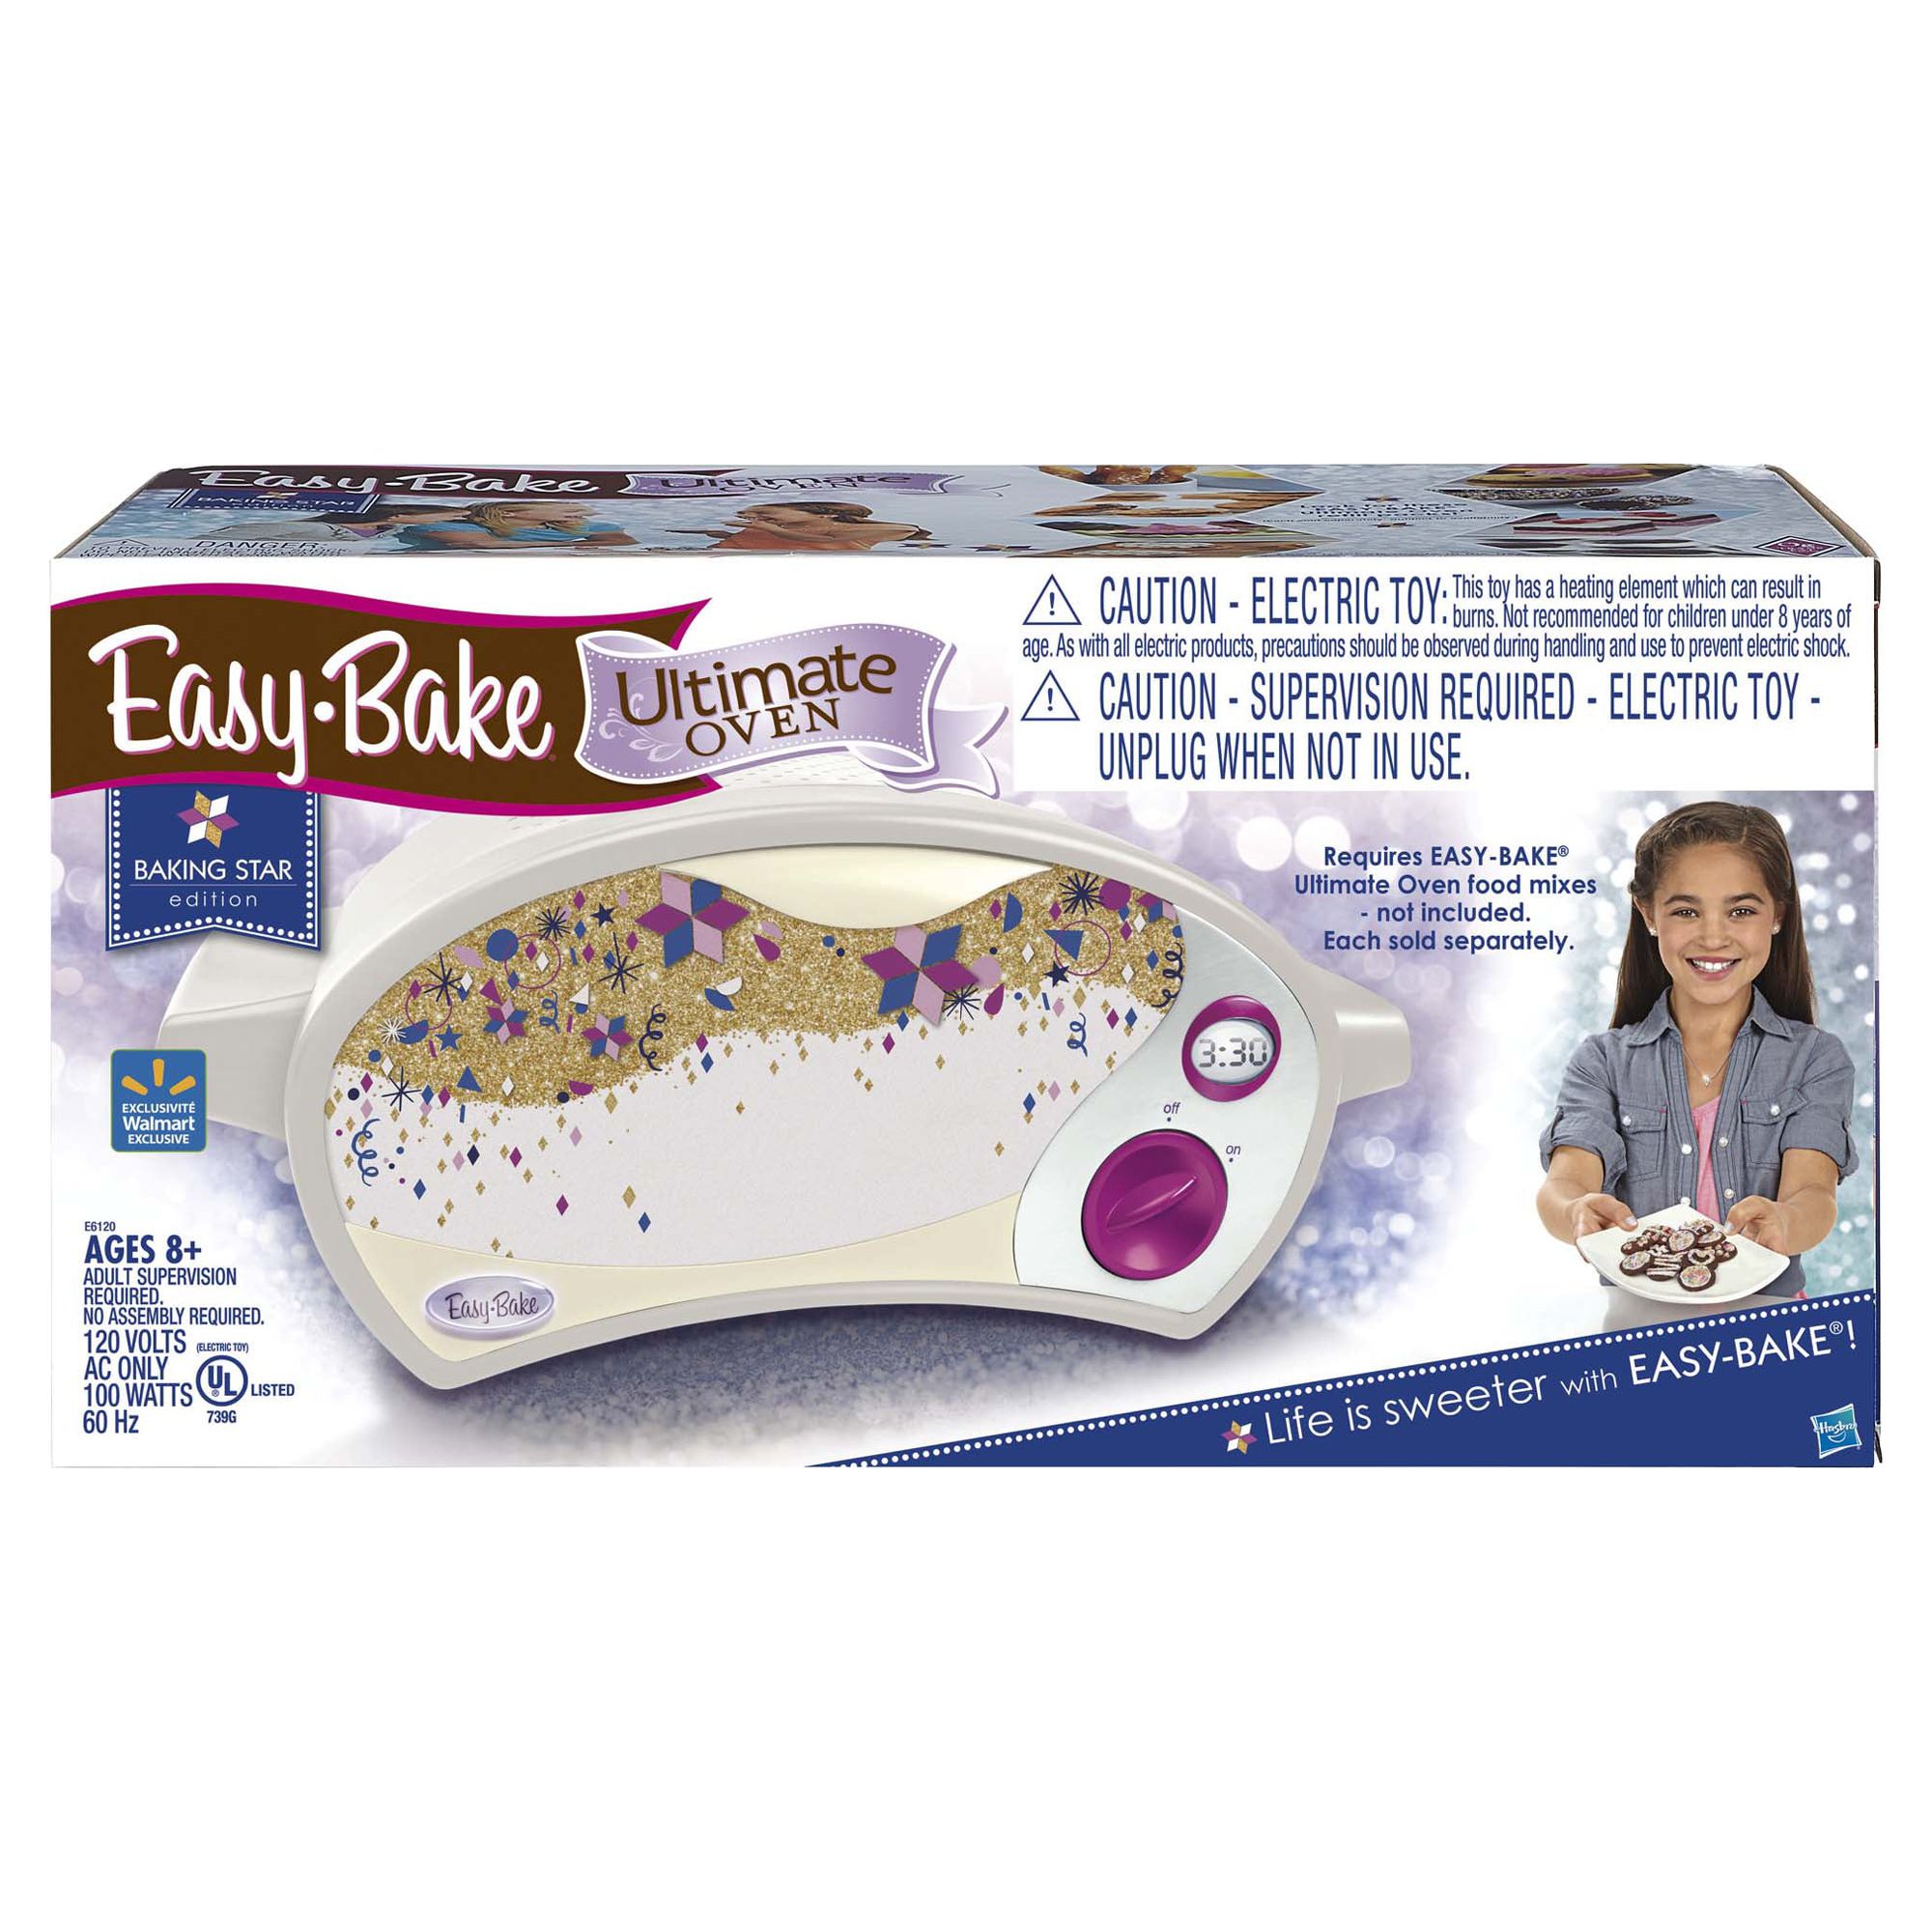 Easy-Bake Ultimate Oven Toy, Baking Star Edition, for Kids Ages 8 and Up - image 2 of 9